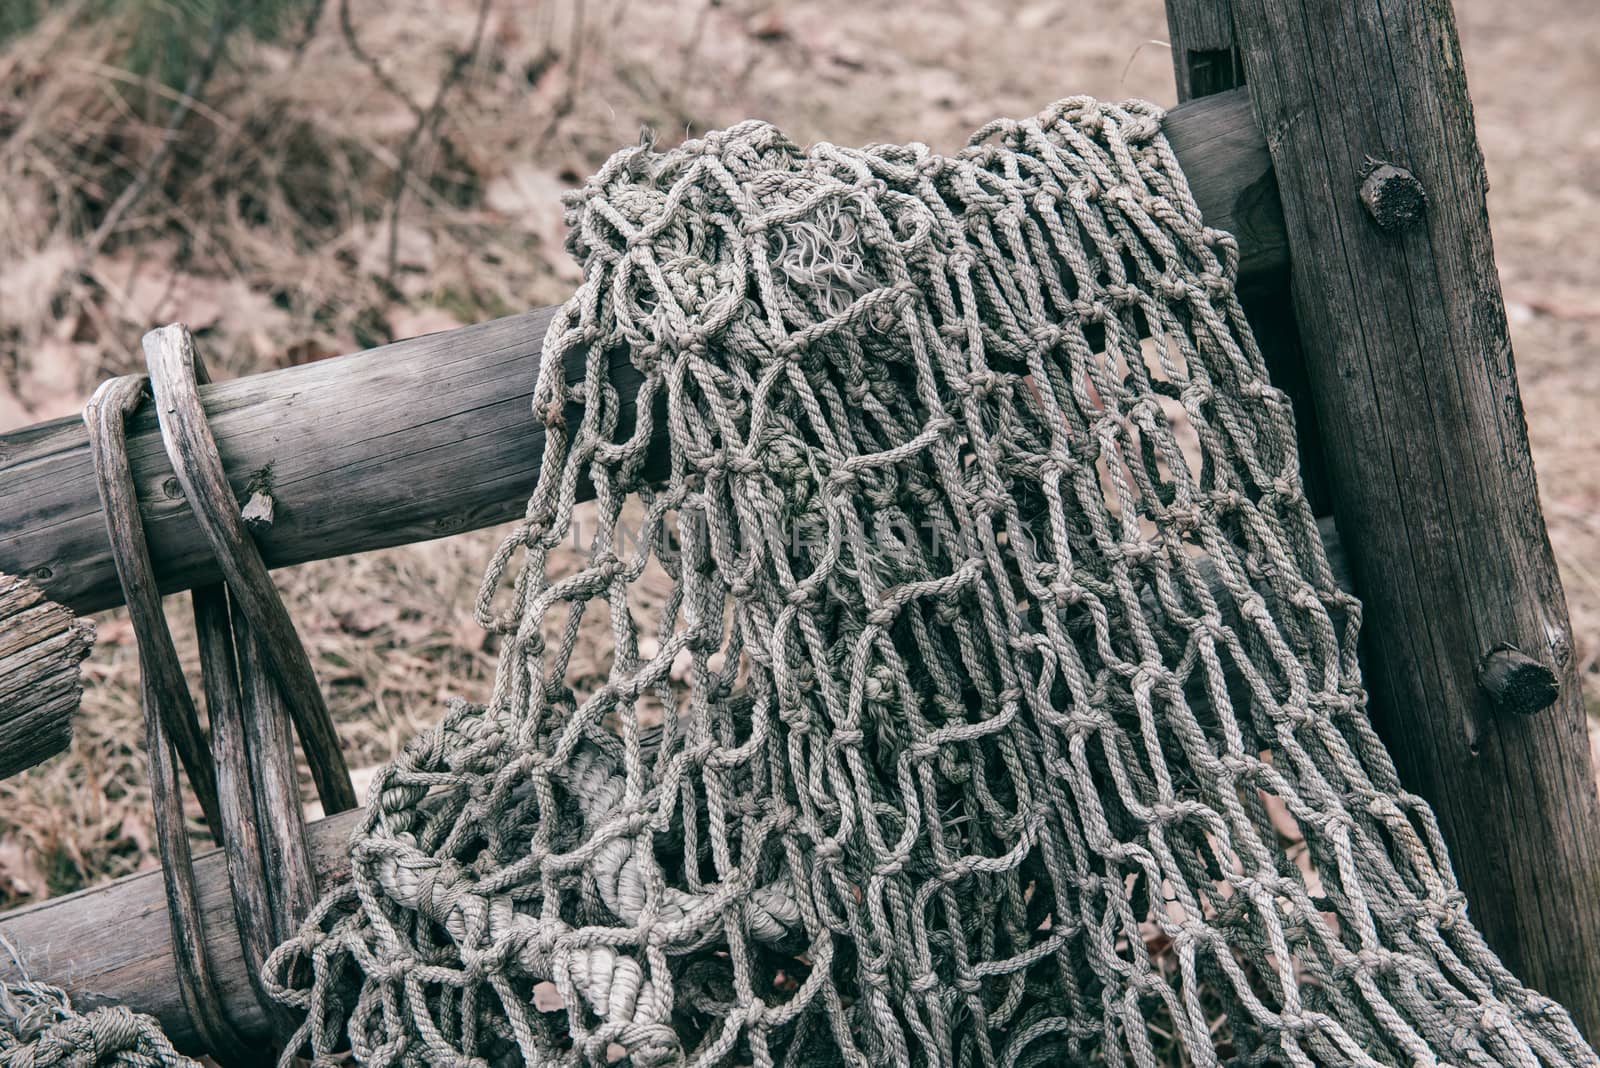 Fishing old network, fishing net texture of fisherman folk, woven with nylon rope.